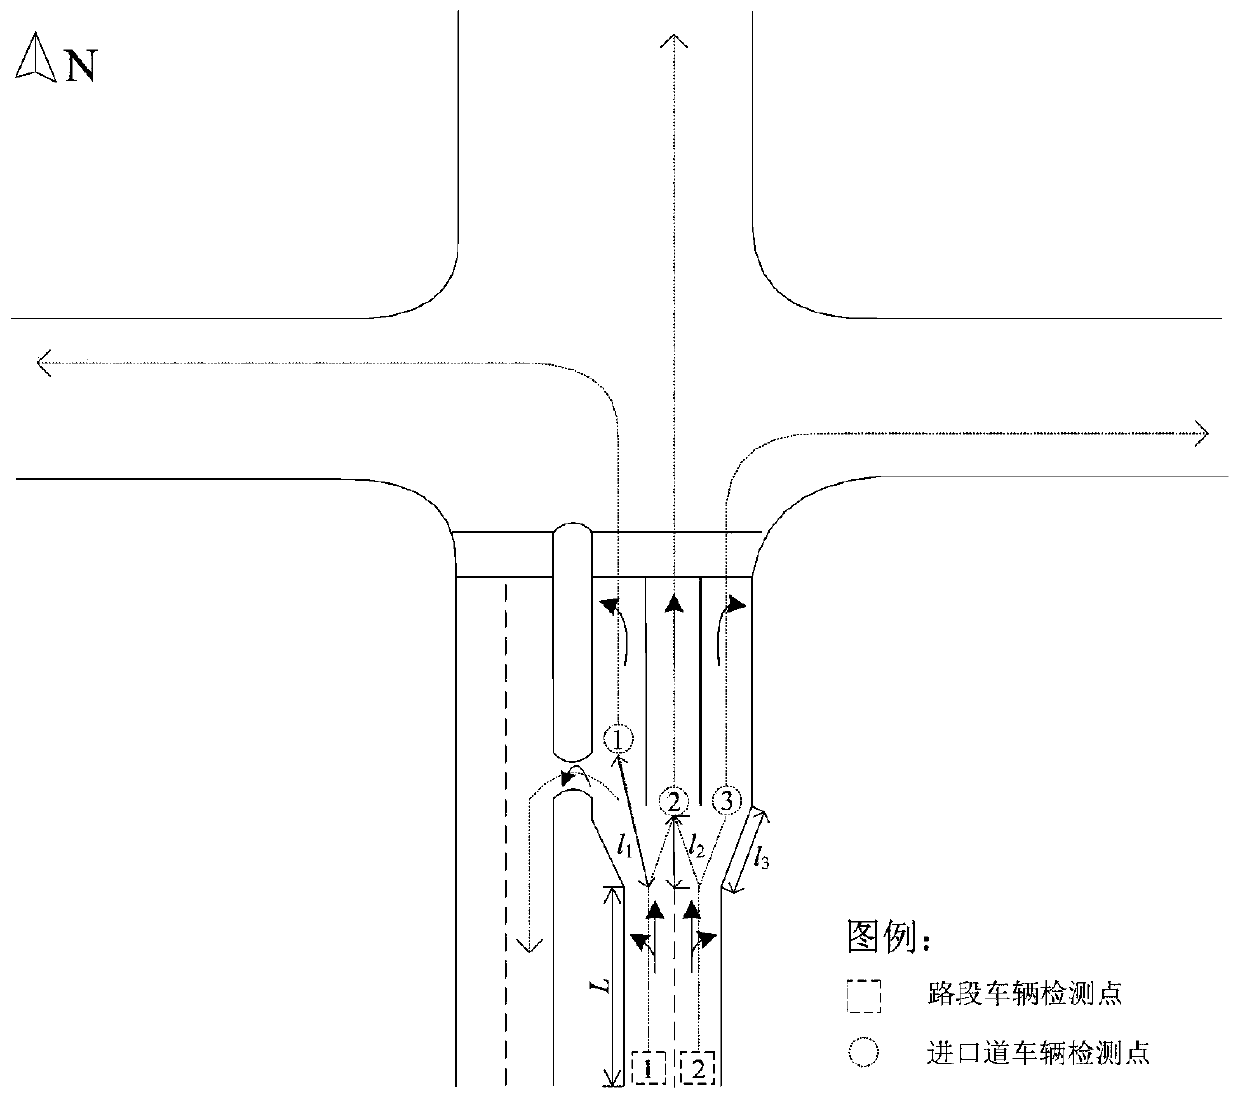 Vehicle lane change detection and control method for intersection induction control